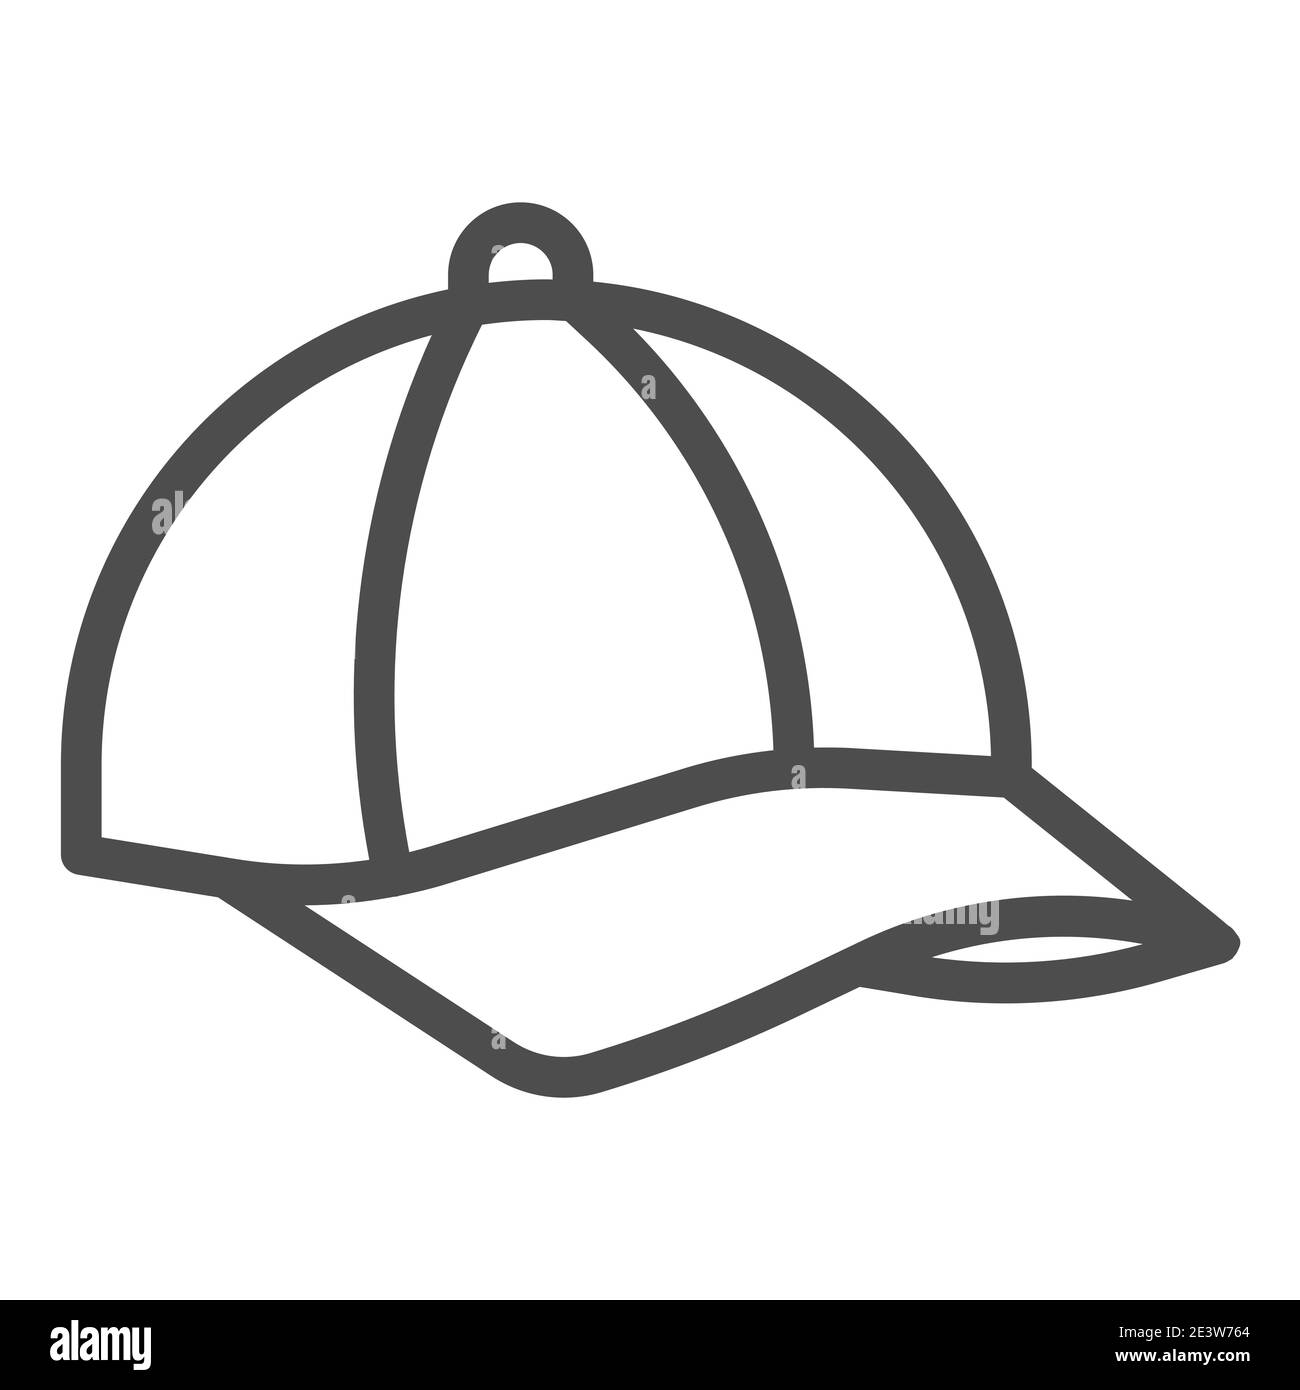 https://c8.alamy.com/comp/2E3W764/cap-line-icon-summer-concept-baseball-cap-sign-on-white-background-sport-hat-icon-in-outline-style-for-mobile-concept-and-web-design-vector-2E3W764.jpg